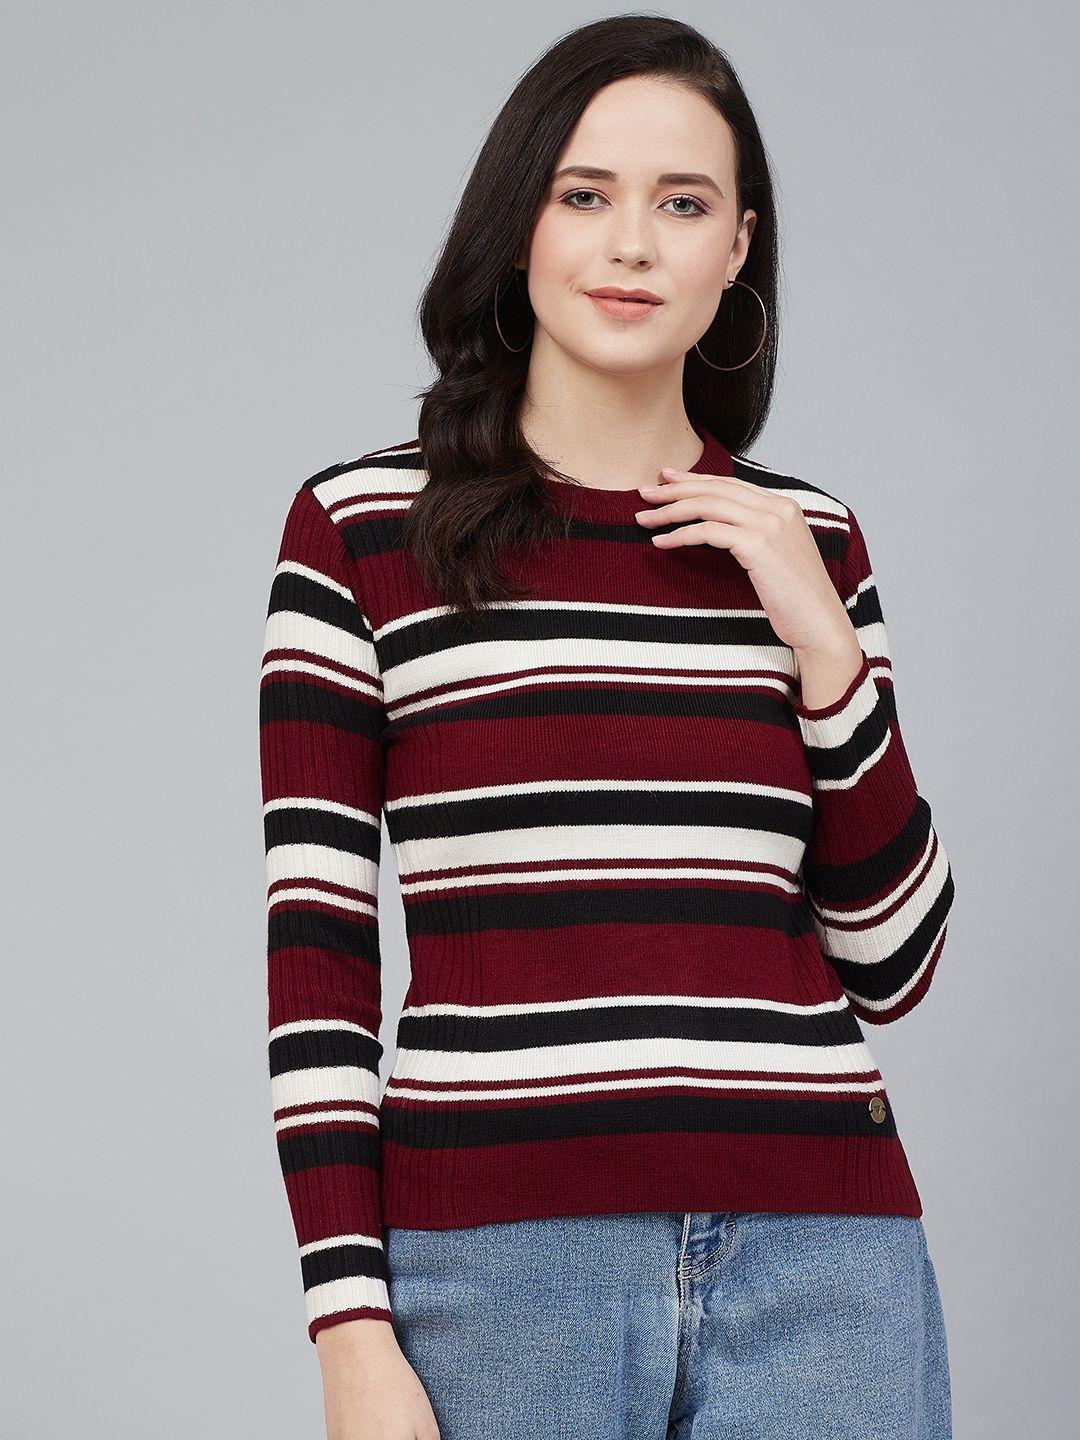 cayman-women-maroon-&-off-white-striped-pullover-acrylic-sweater